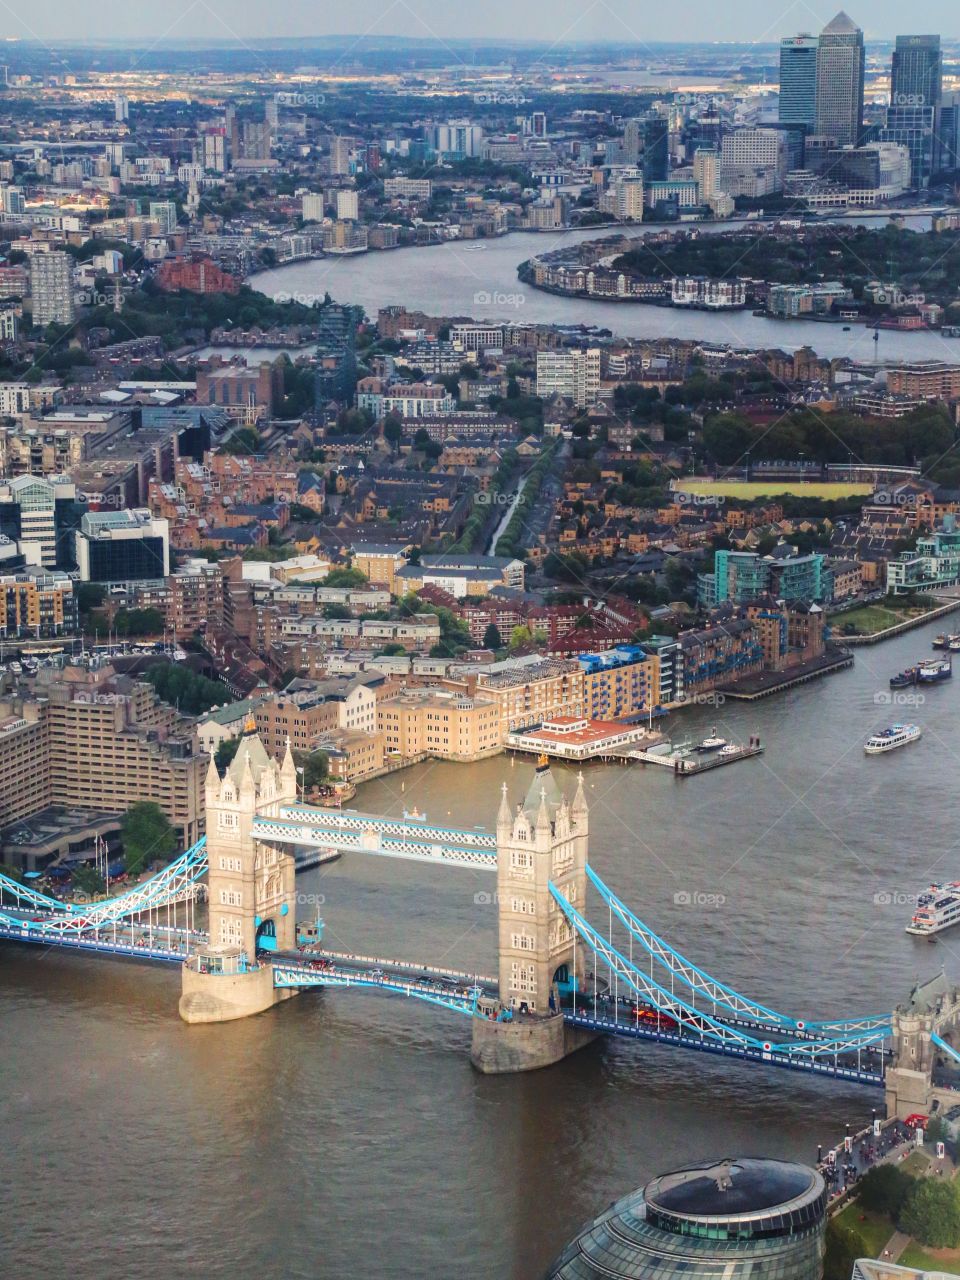 Tower Bridge and the Thames seen from the Shard